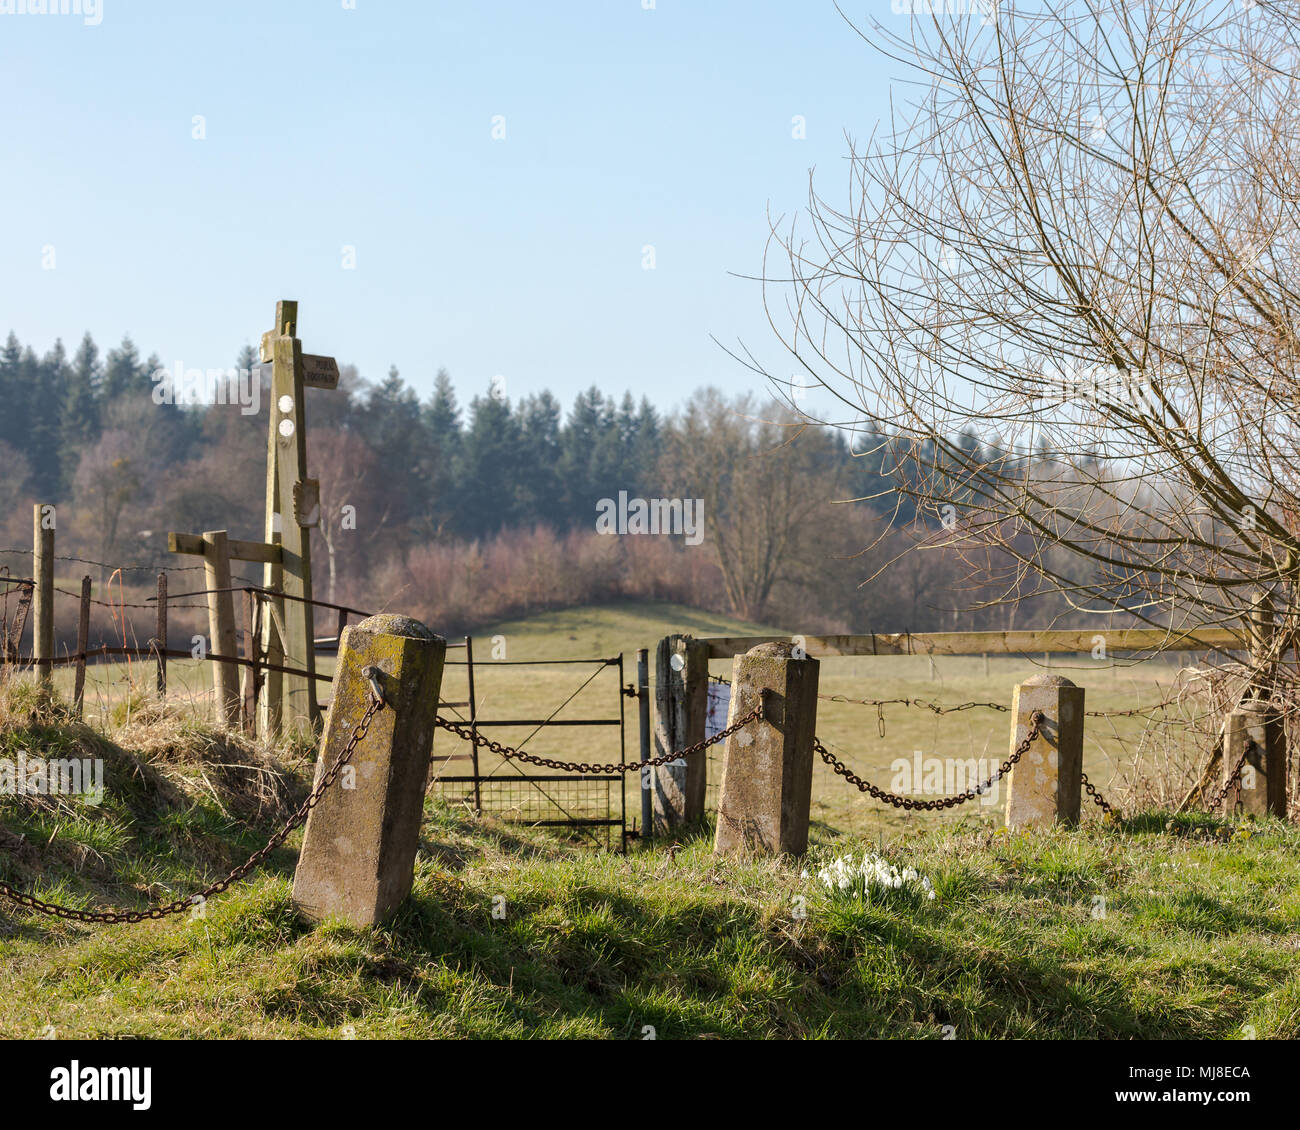 A springtime walk in the countryside. A signpost indicates taking public footpath, right of way, through field in the background. Snowdrops on ground. Stock Photo